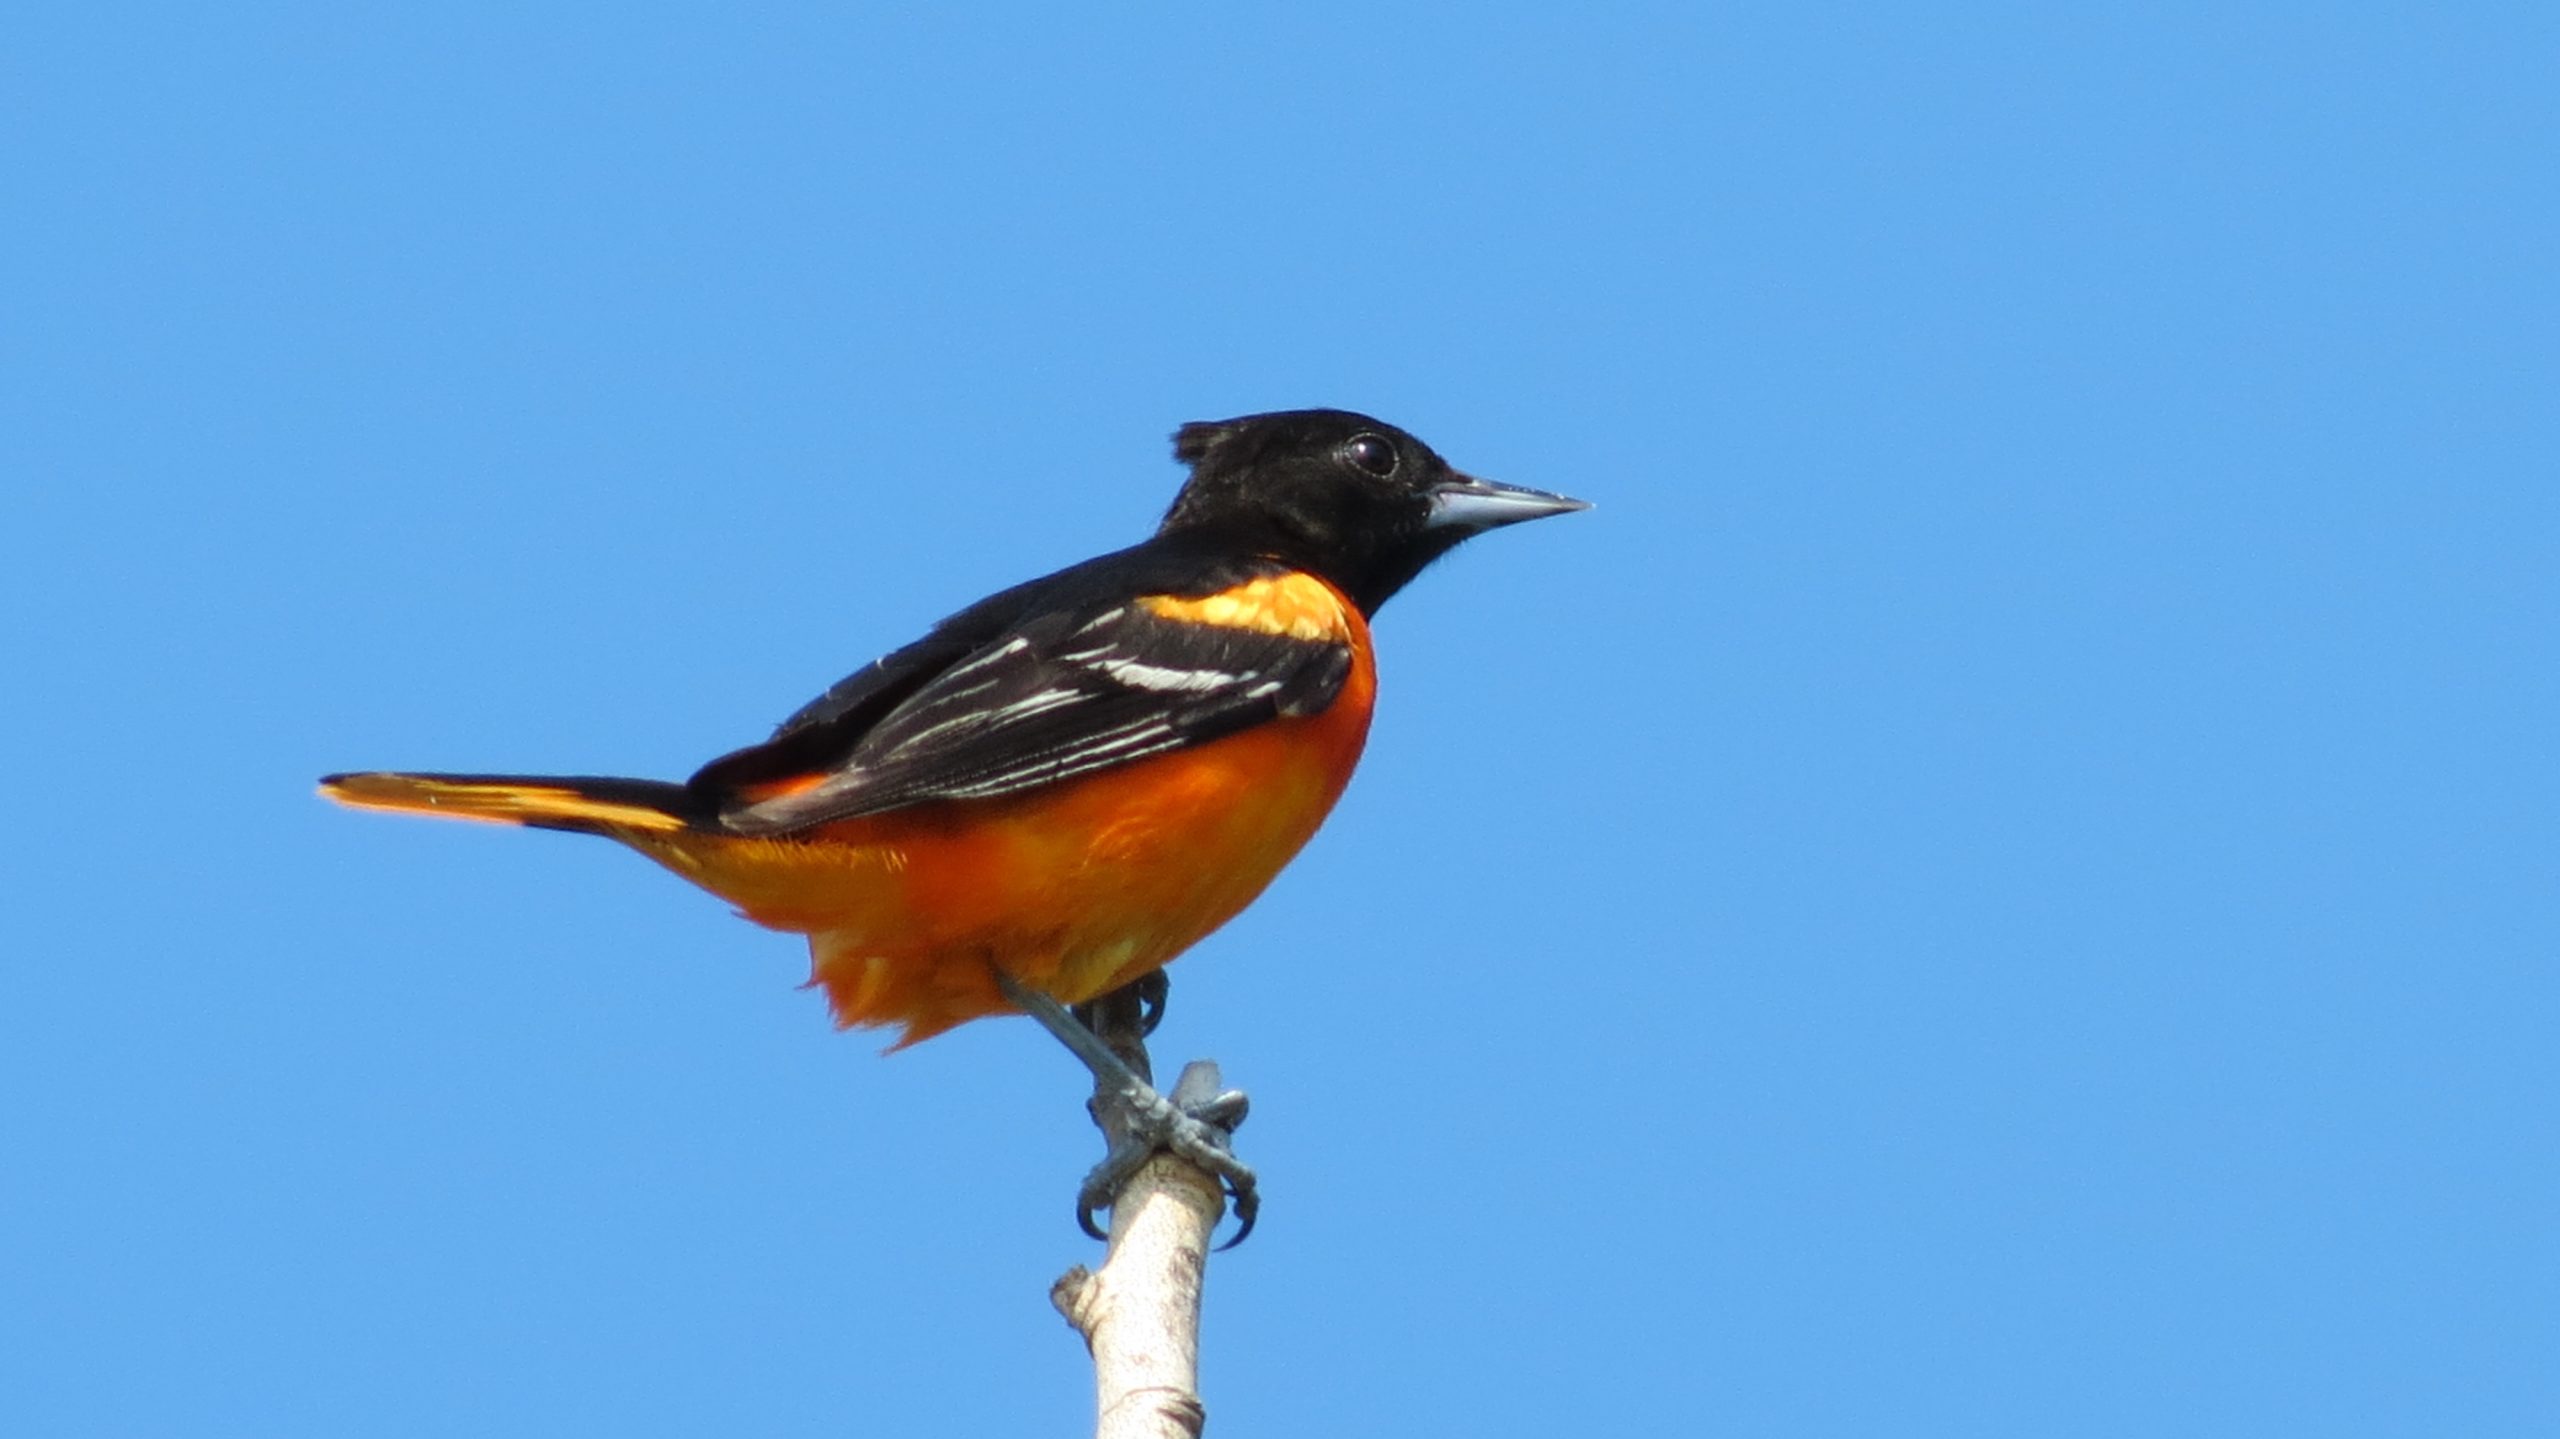 A Baltimore oriole, predominantly orange with black markings, perches on a branch in Tommy Thompson Park.